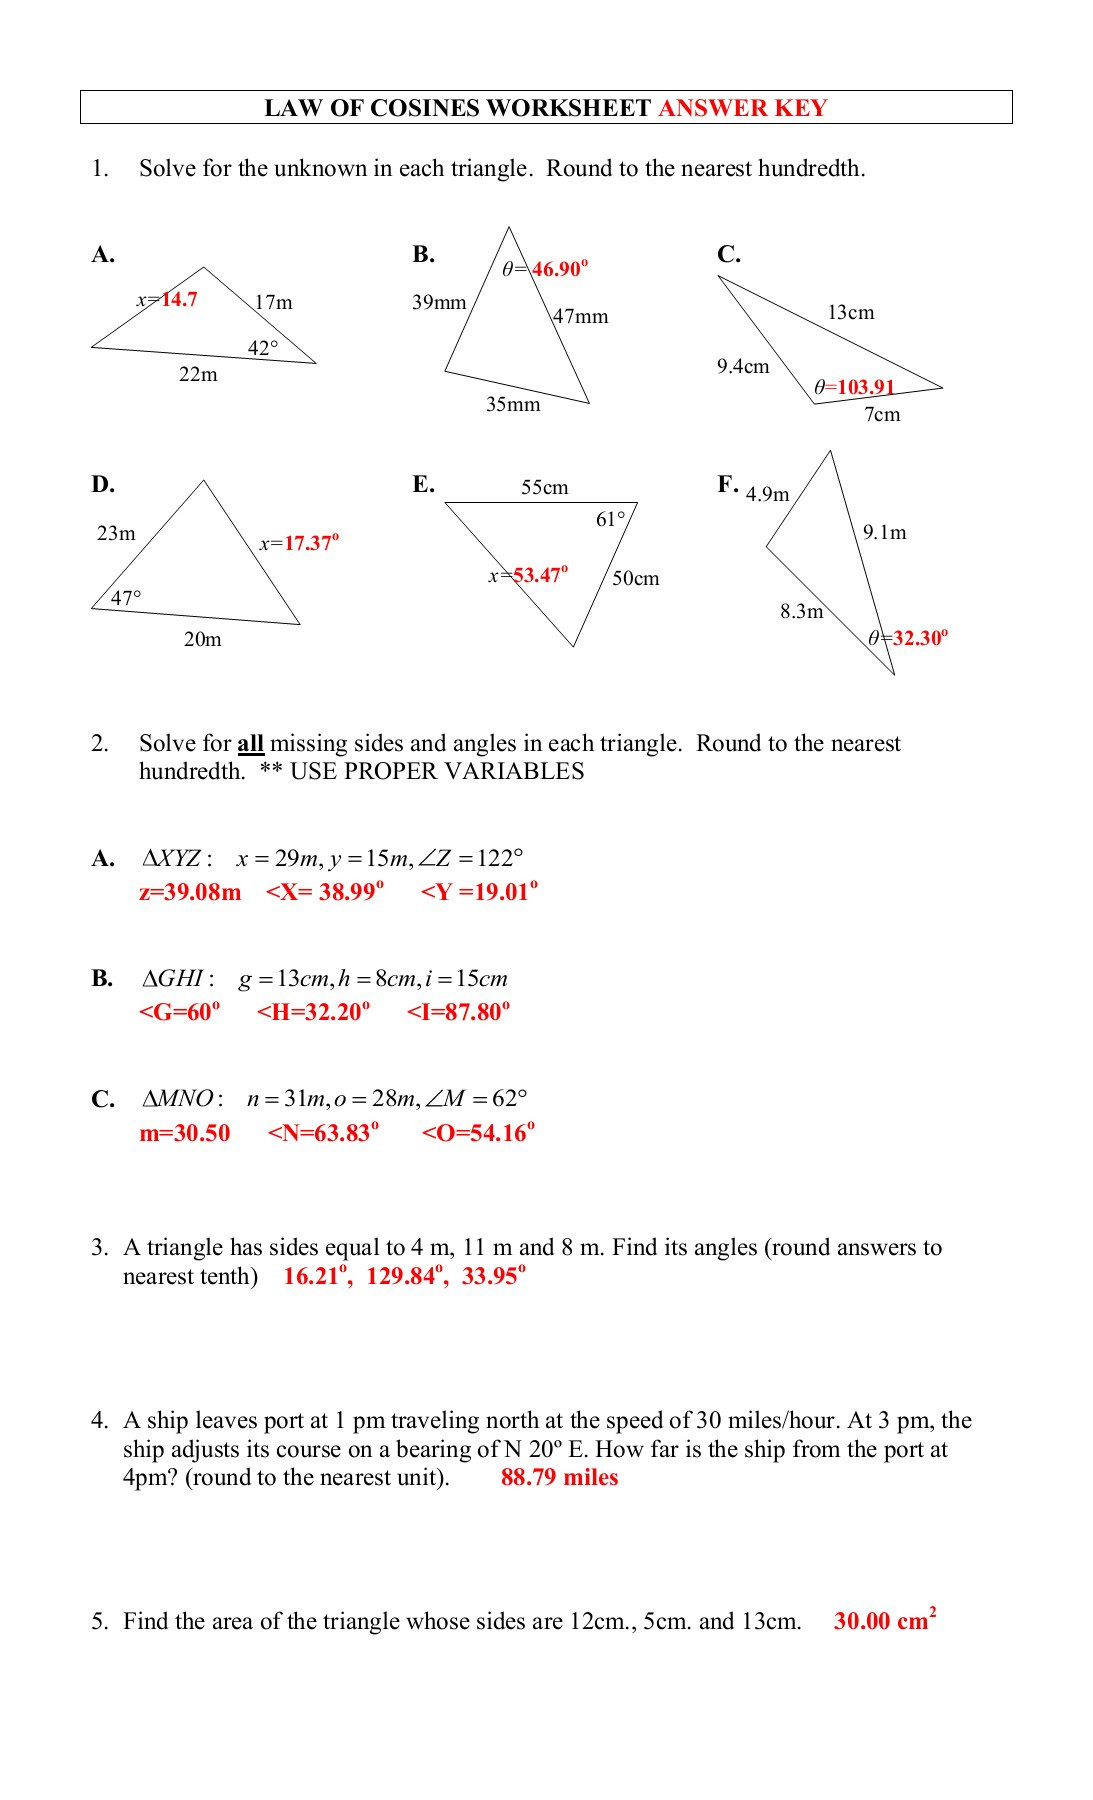 Law Of Cosines Worksheet Law Of Cosines Pages 1 2 Text Version